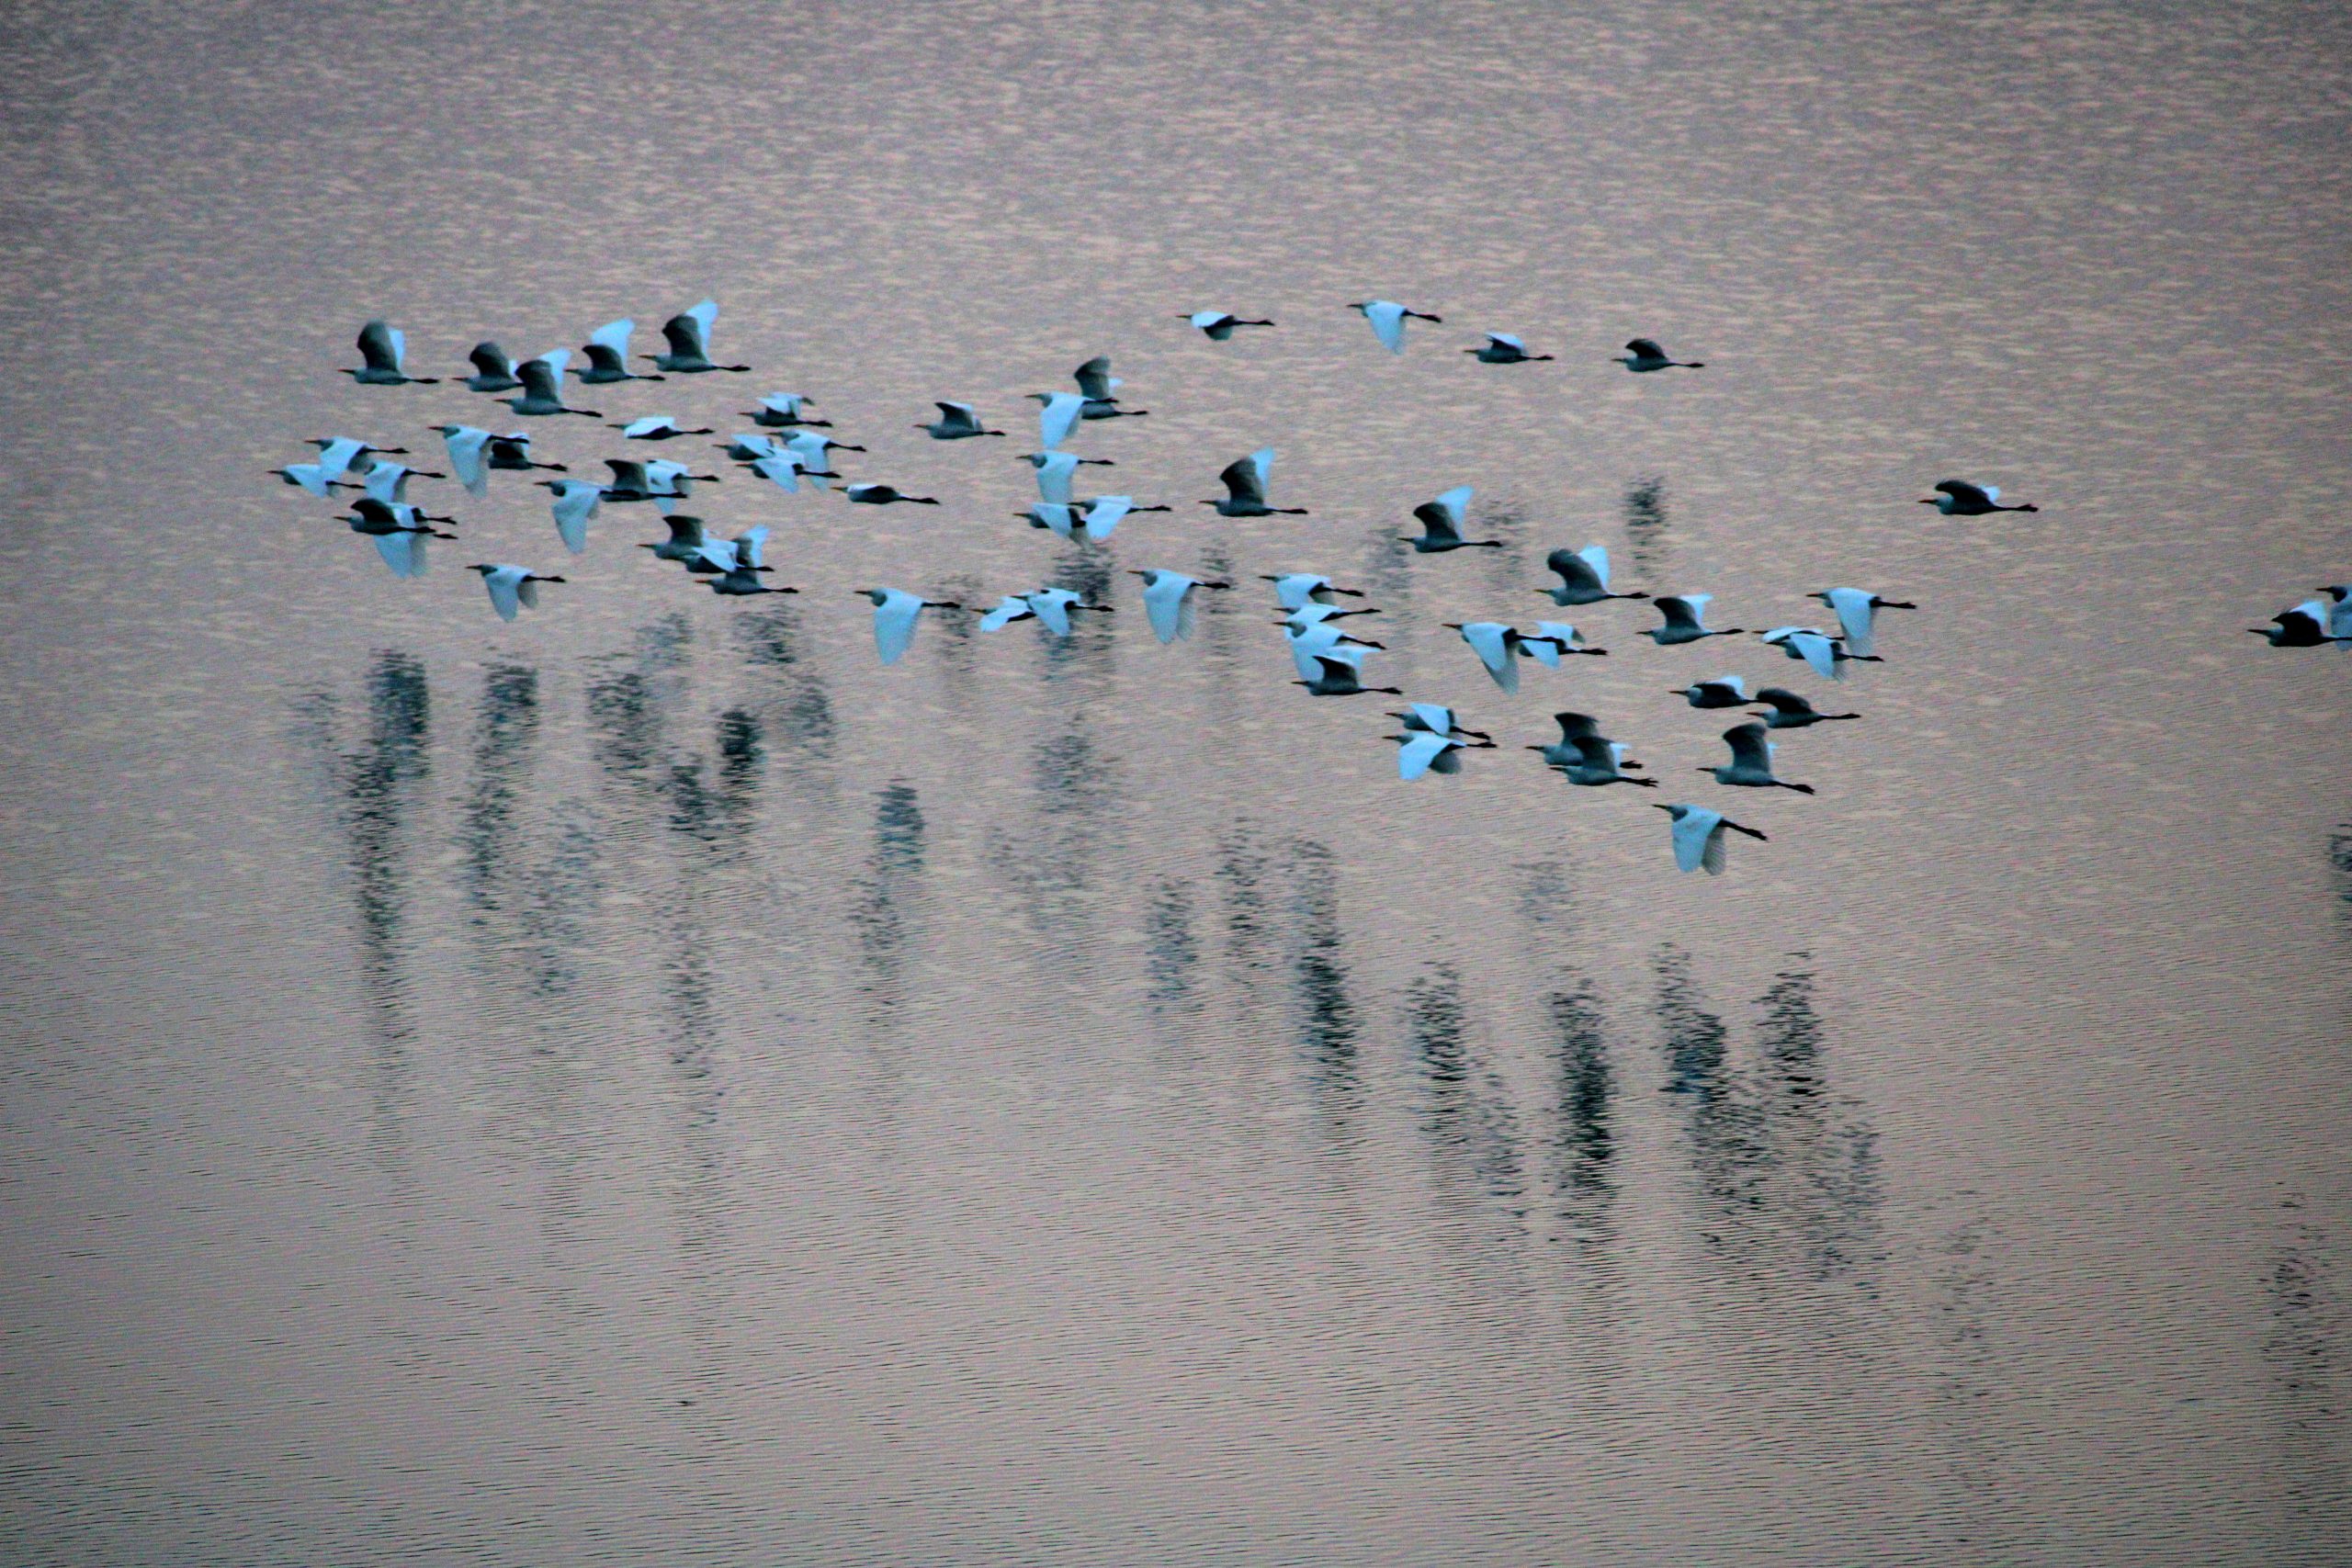 a group of birds flying above water